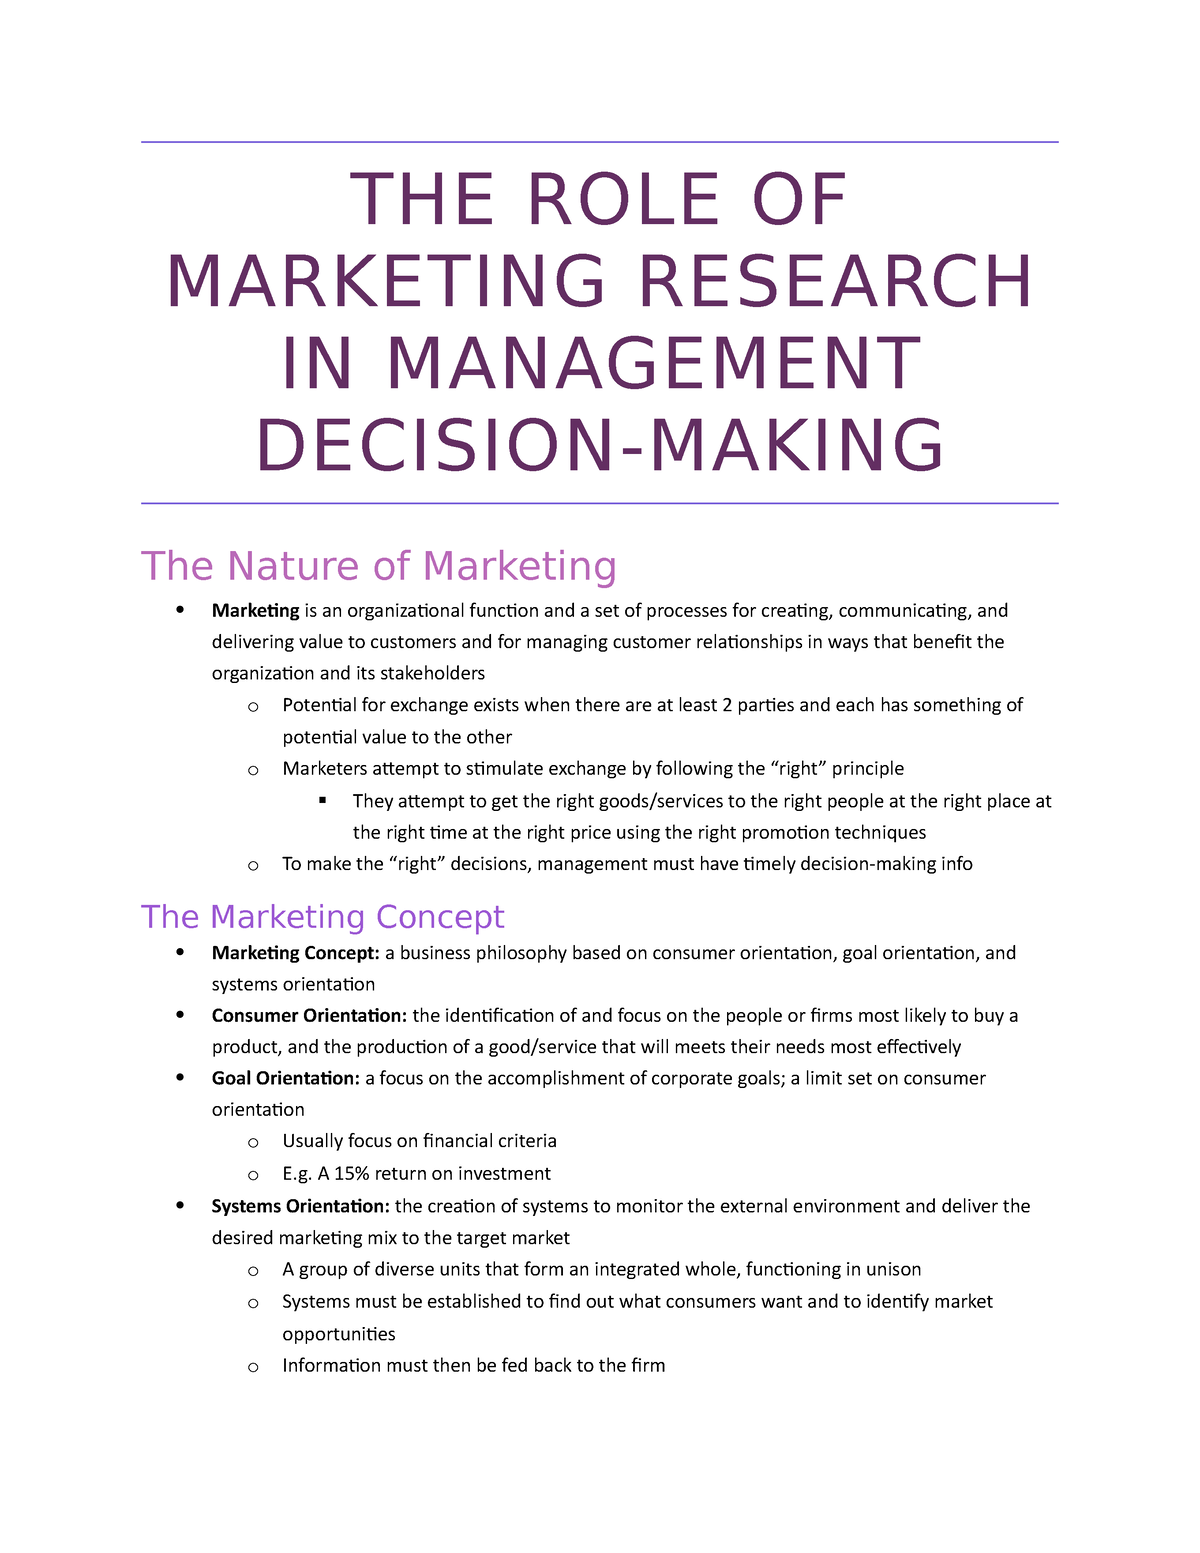 related literature about marketing research